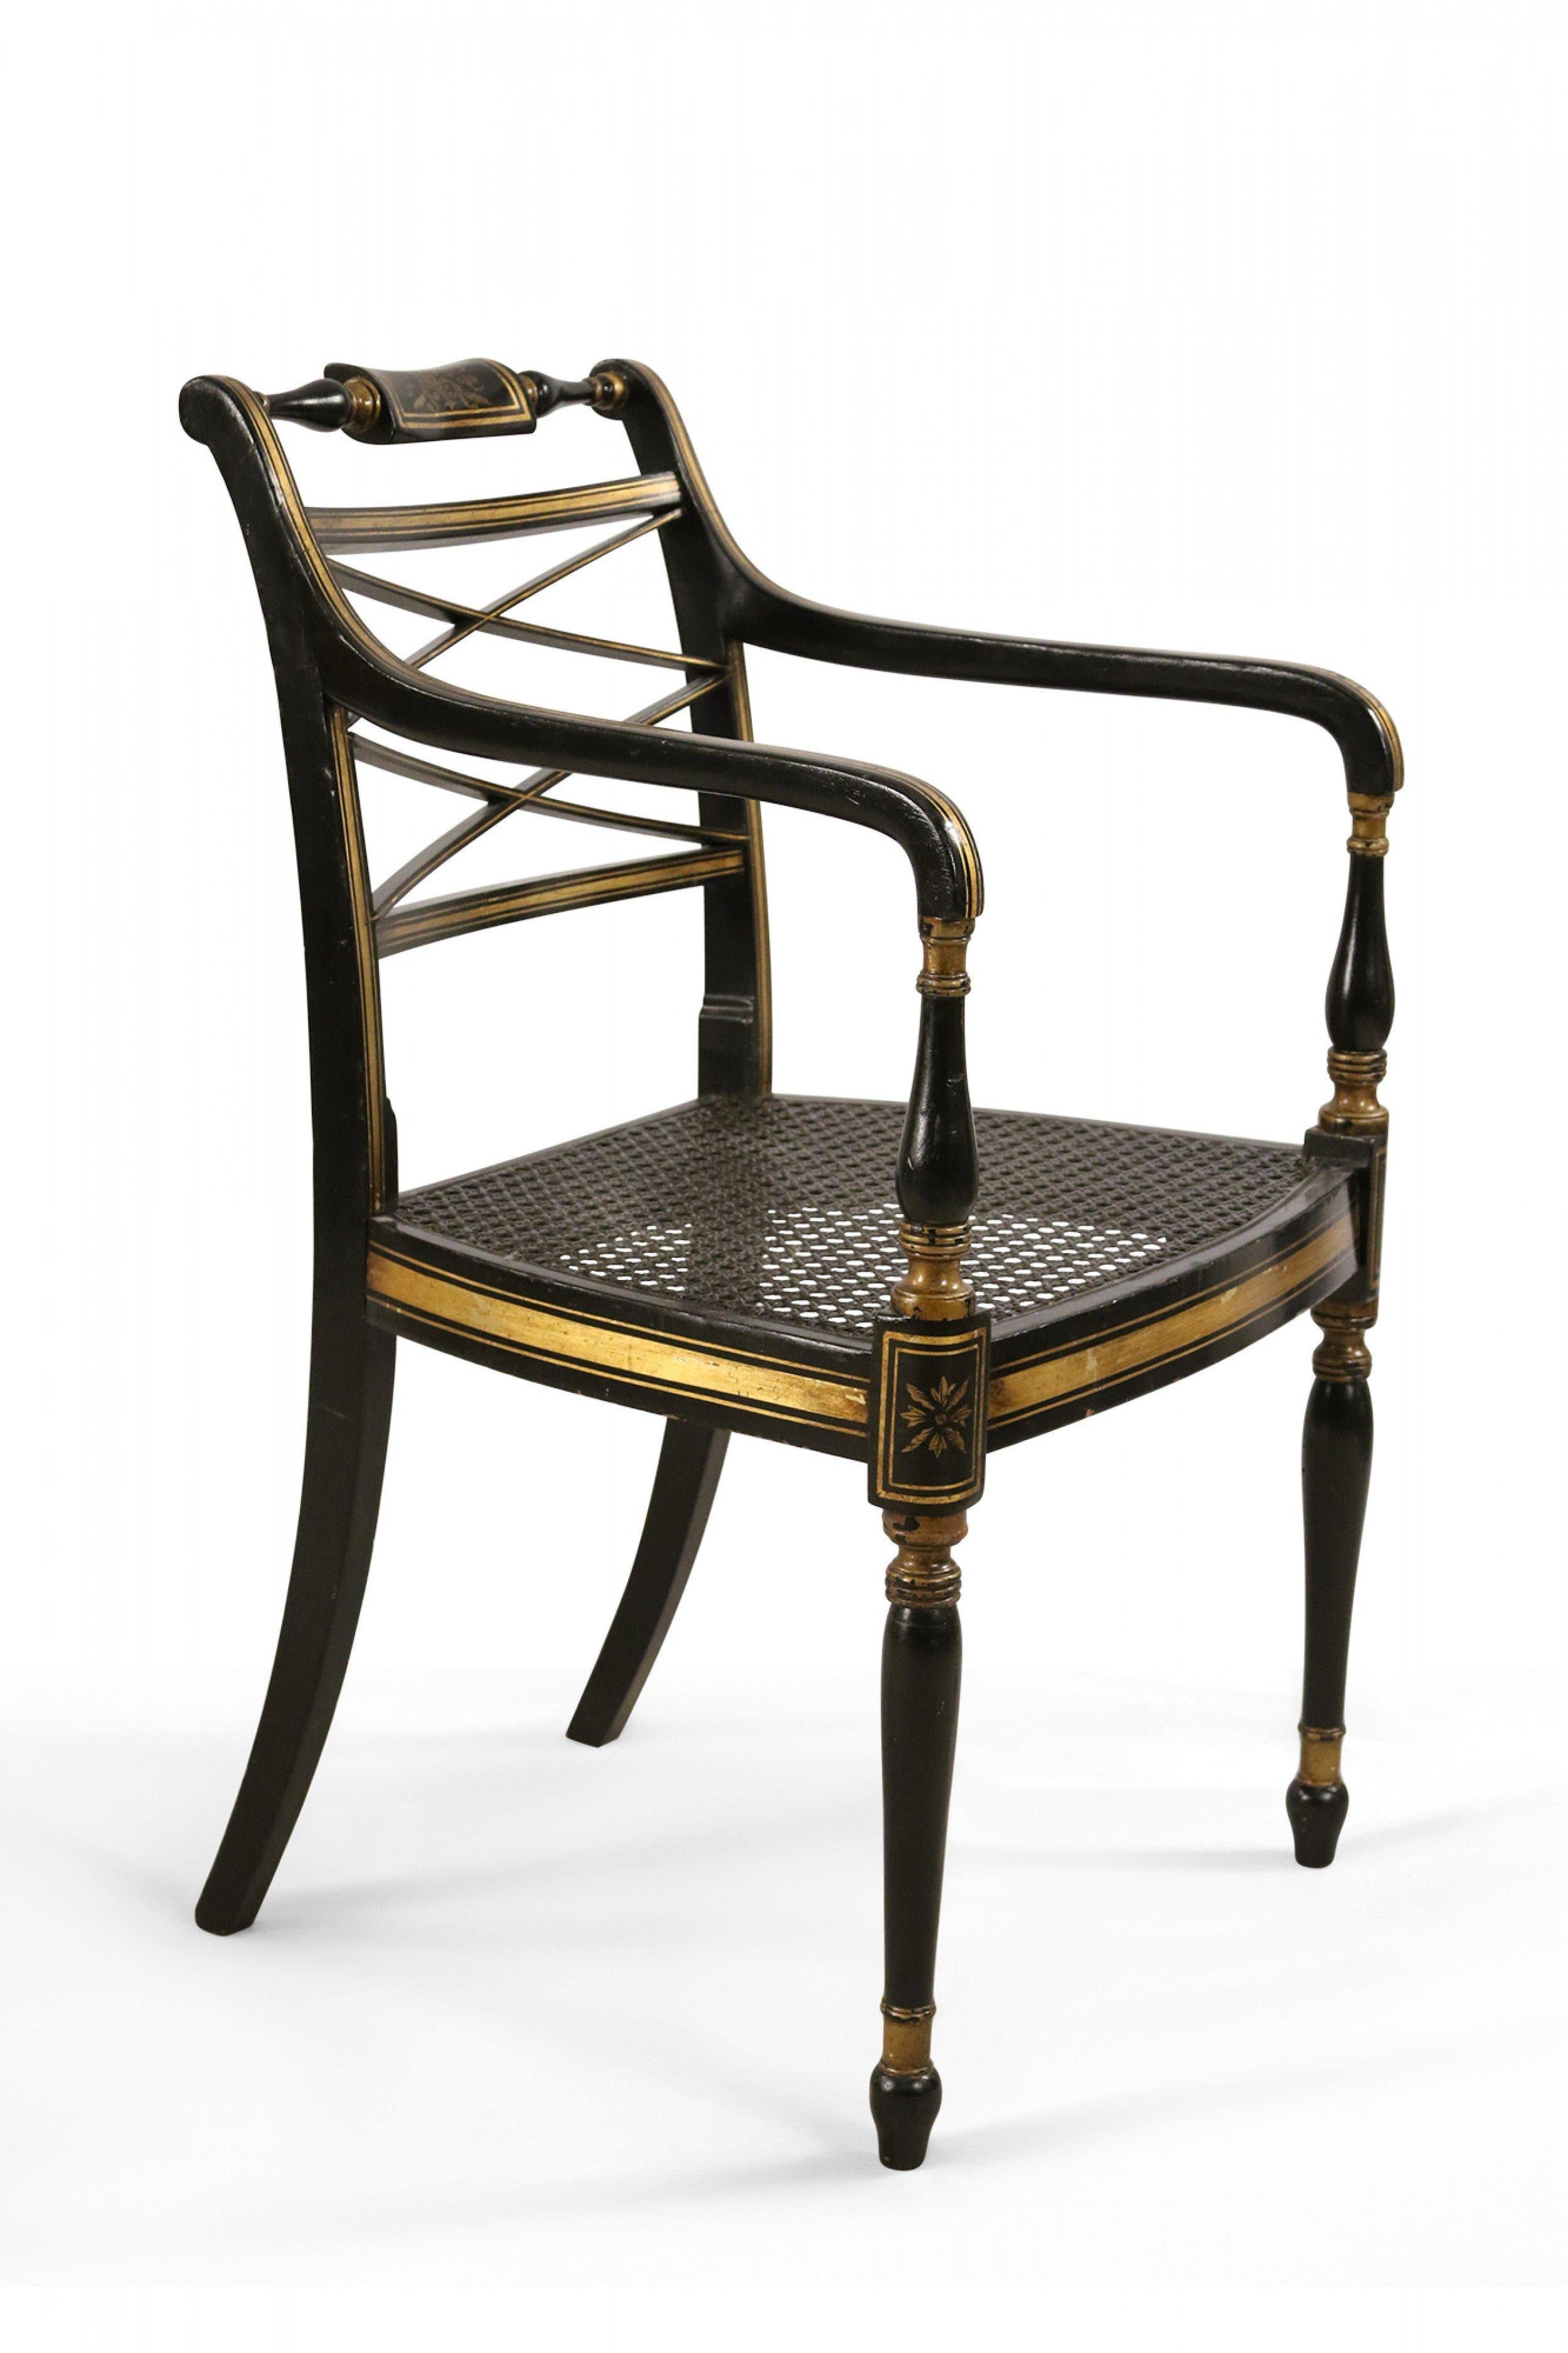 English Regency Style Black and Gold Painted Cane Seat Side Chair For Sale 8